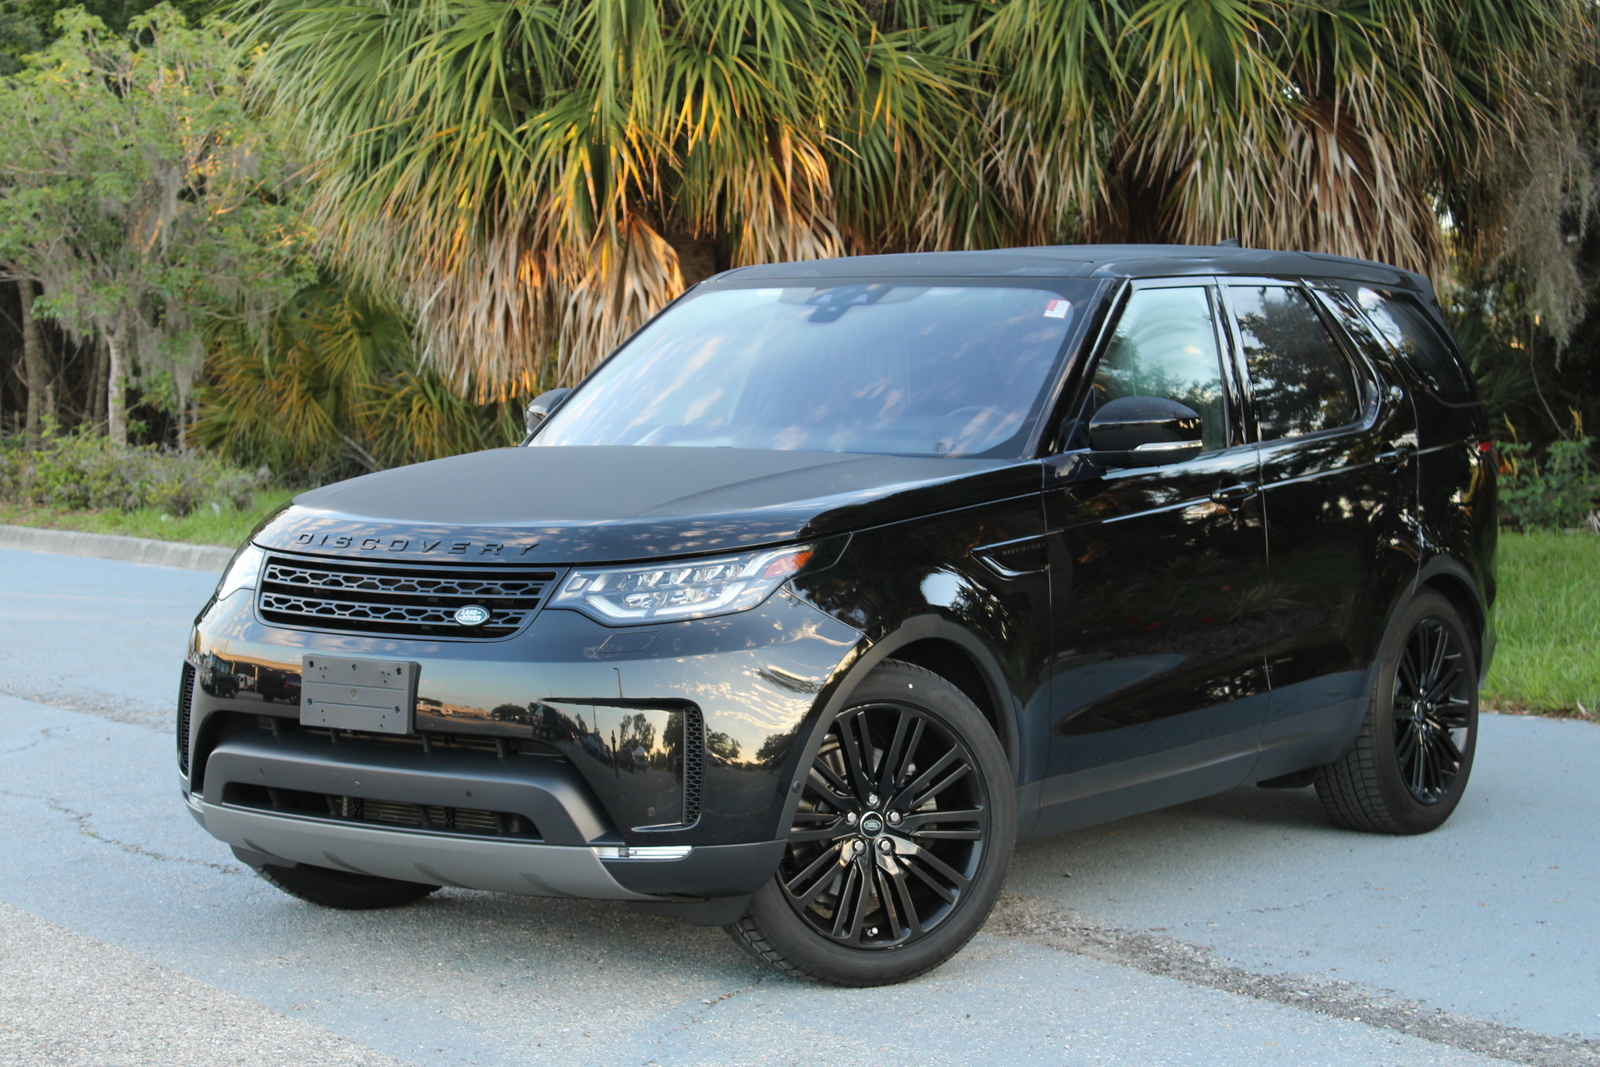 Certified PreOwned 2017 Land Rover Discovery HSE Luxury